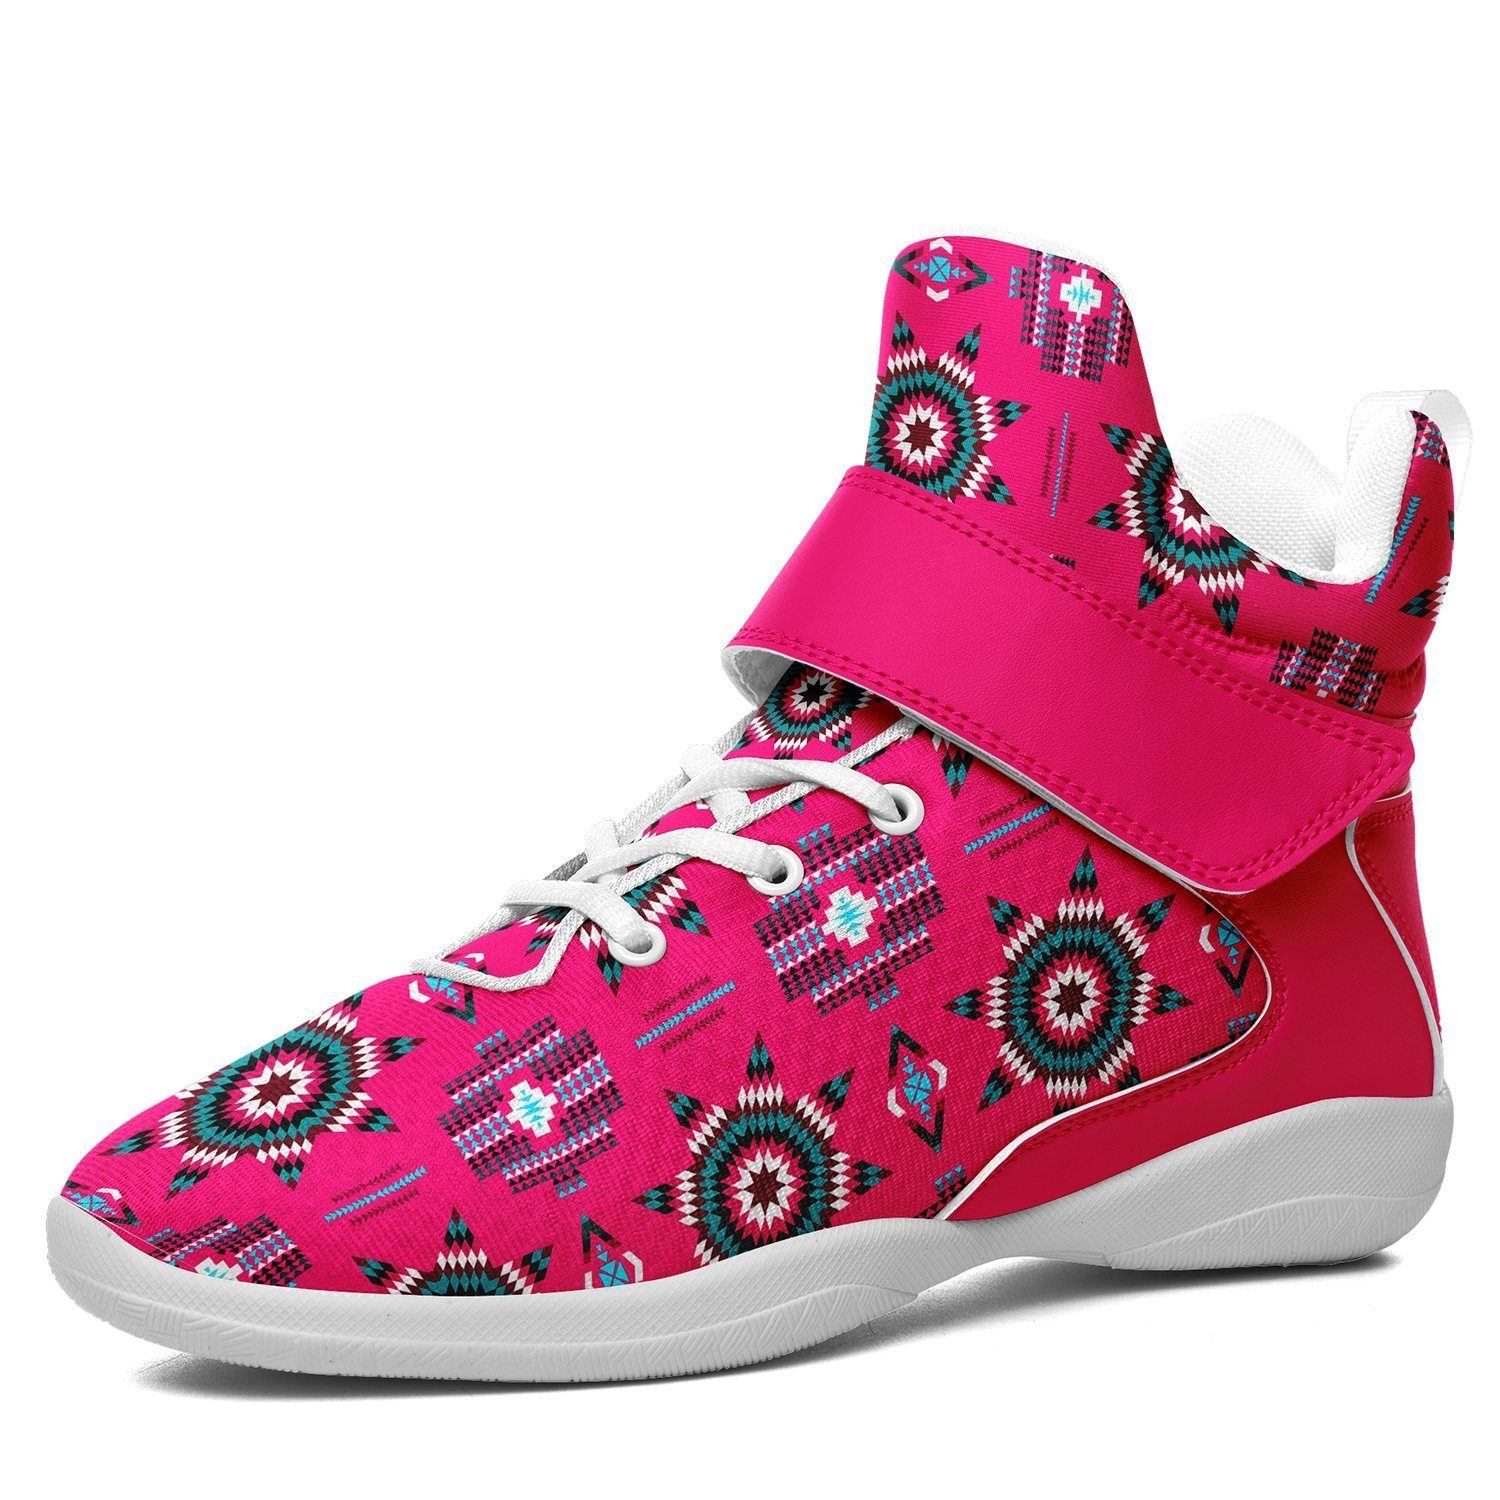 Rising Star Strawberry Moon Ipottaa Basketball / Sport High Top Shoes - White Sole 49 Dzine US Men 7 / EUR 40 White Sole with Pink Strap 